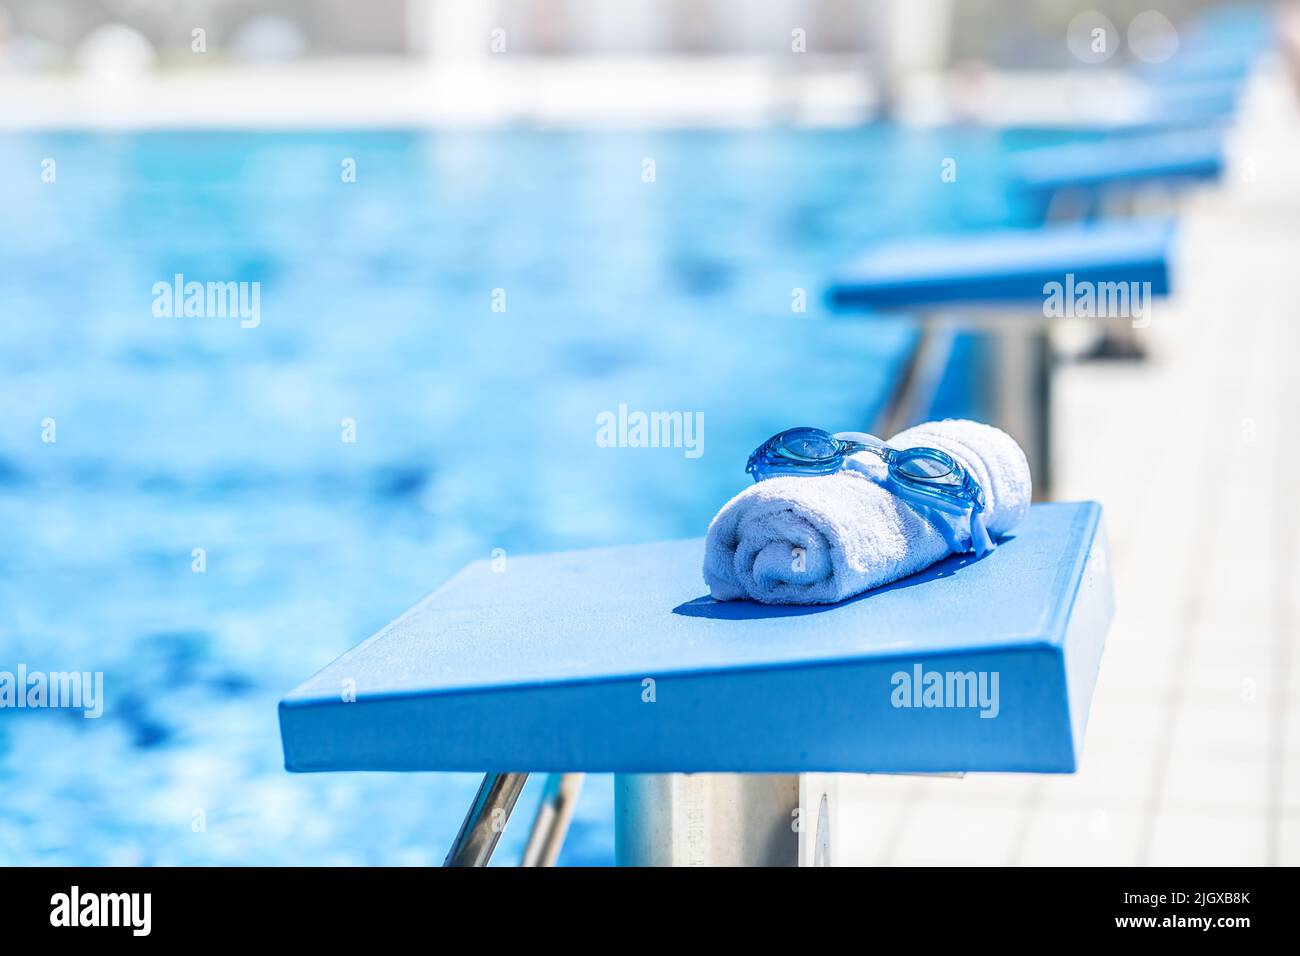 Swimming goggles and a towel placed on the starting bridge by the swimming pool. Stock Photo